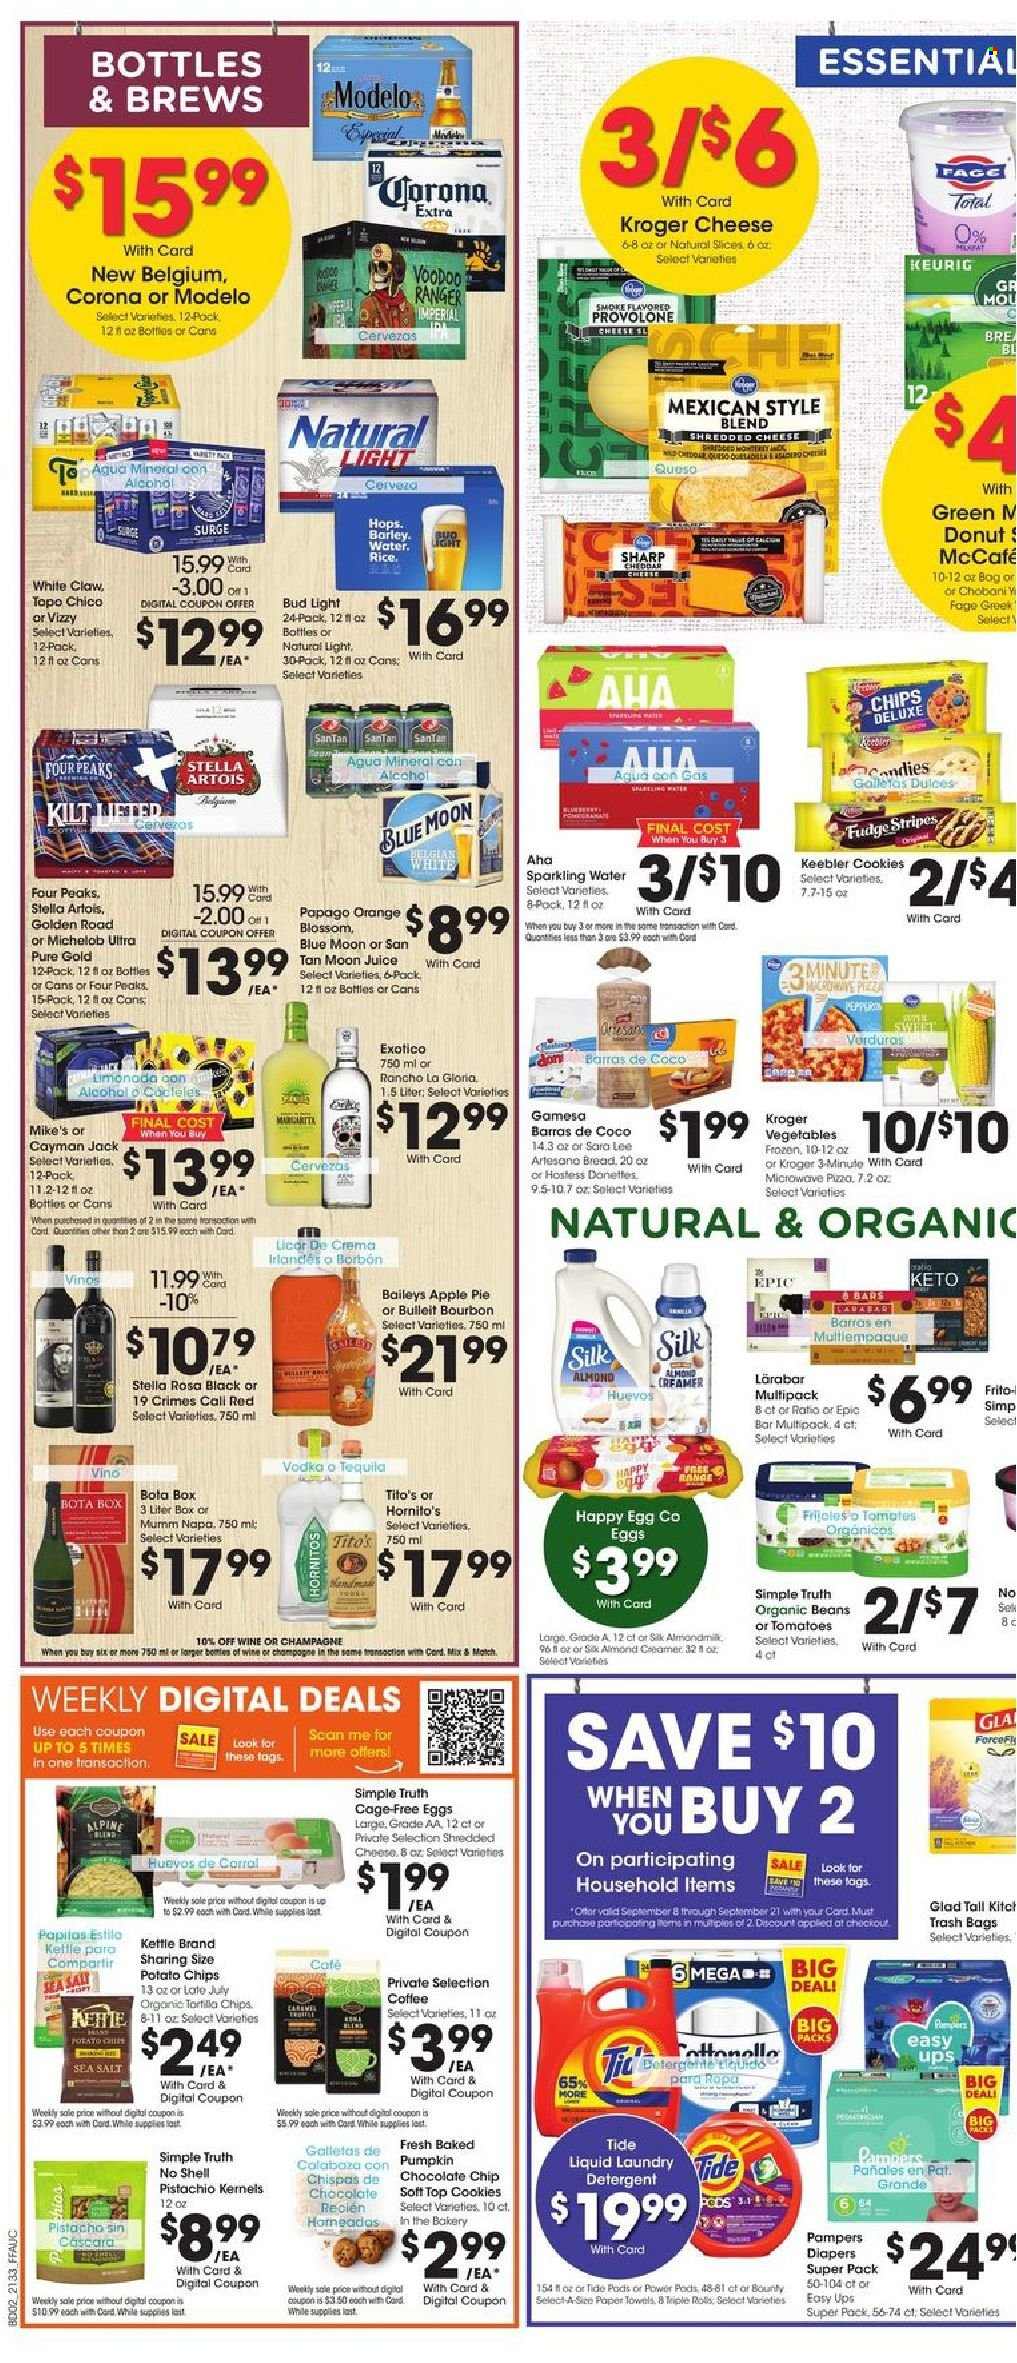 thumbnail - Fry’s Flyer - 09/15/2021 - 09/21/2021 - Sales products - Apple, pie, apple pie, donut, tomatoes, pumpkin, oranges, shredded cheese, Provolone, Chobani, Silk, eggs, cage free eggs, Blossom, creamer, cookies, fudge, Bounty, Keebler, potato chips, juice, sparkling water, coffee, McCafe, Keurig, champagne, wine, alcohol, bourbon, tequila, vodka, Baileys, White Claw, beer, Bud Light, Corona Extra, Modelo, Pampers, nappies, detergent, Tide, trash bags, Sharp, towel, microwave, Stella Artois, Blue Moon, Michelob. Page 5.